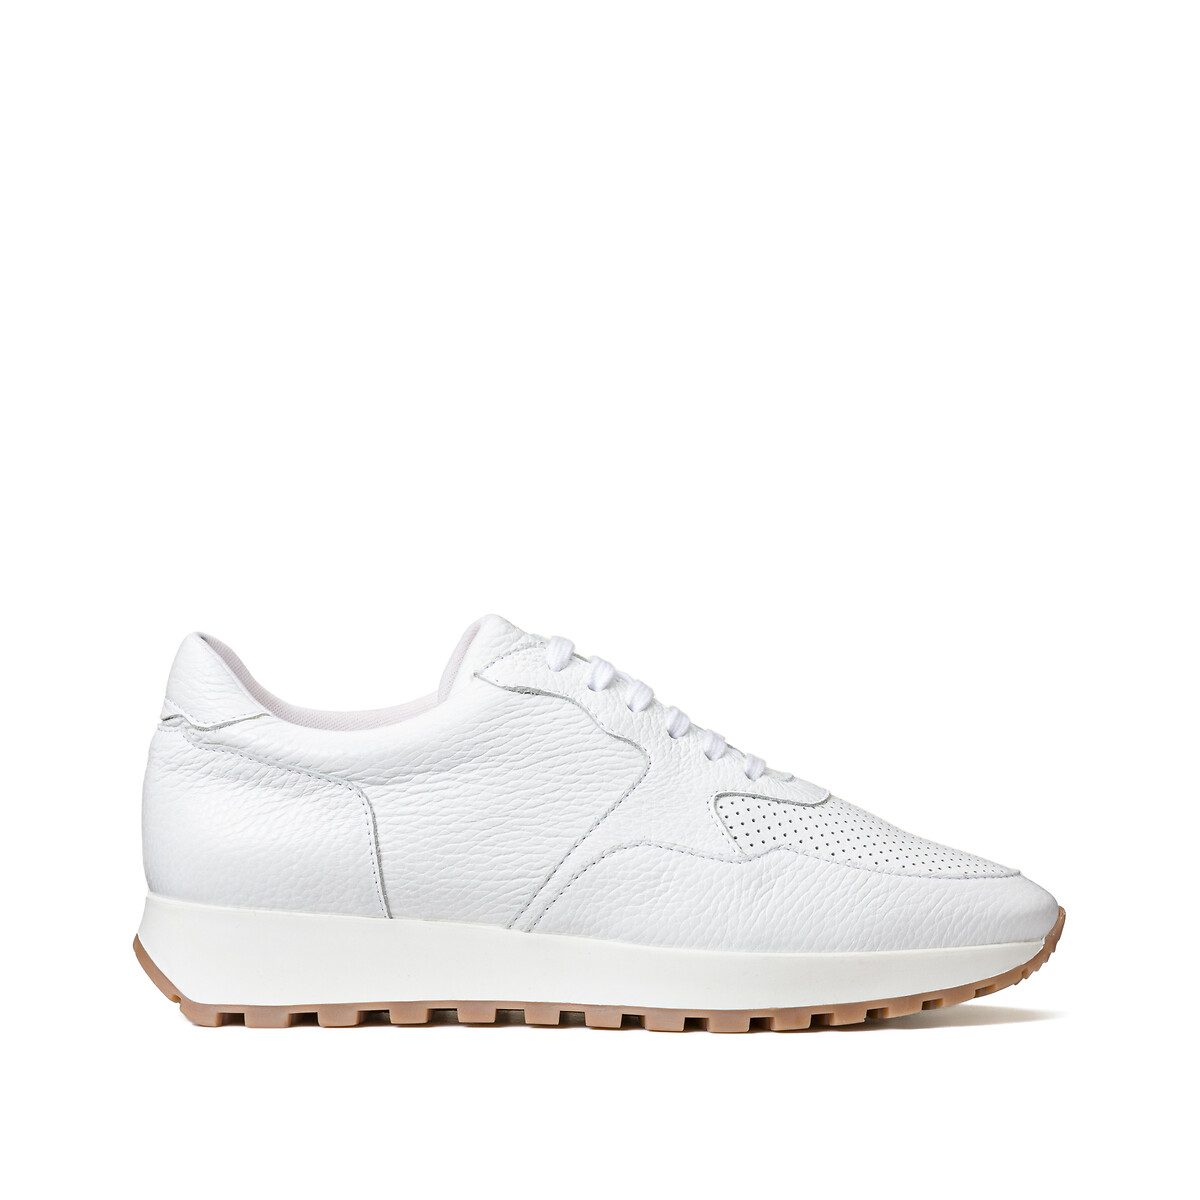 Leather trainers, white, Anne Weyburn | La Redoute